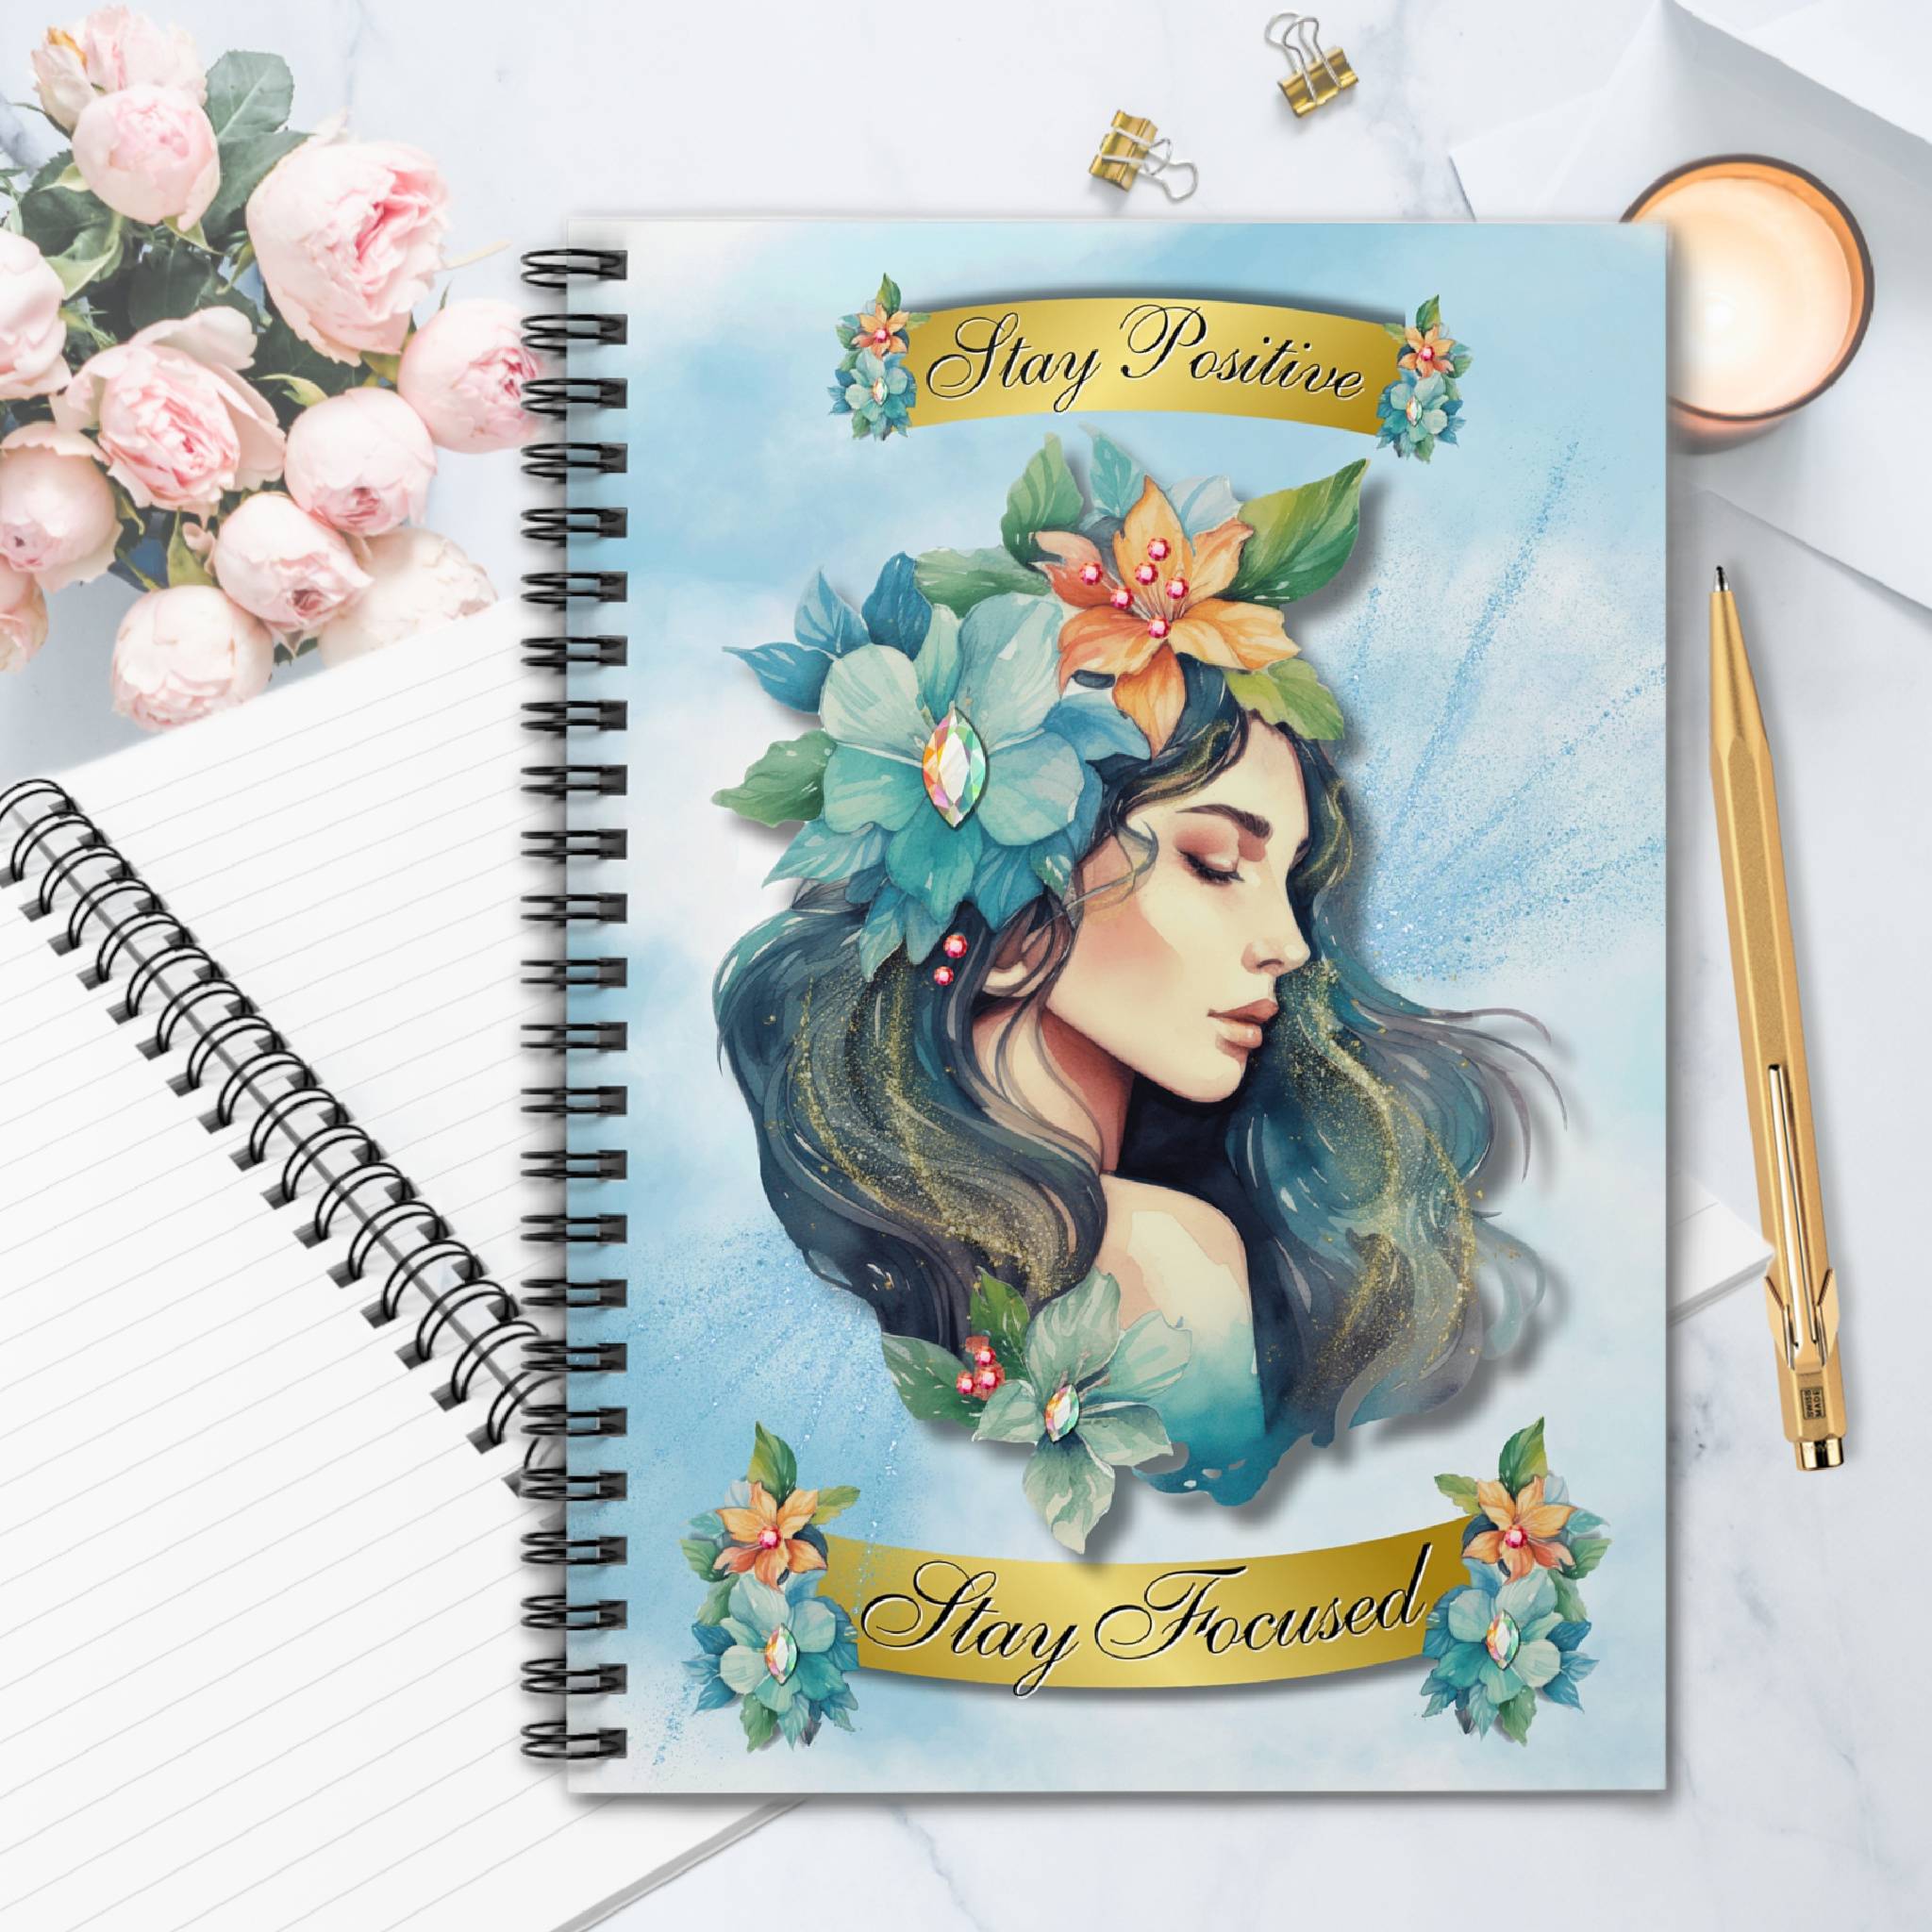 journal notebook - stay positive, stay focused